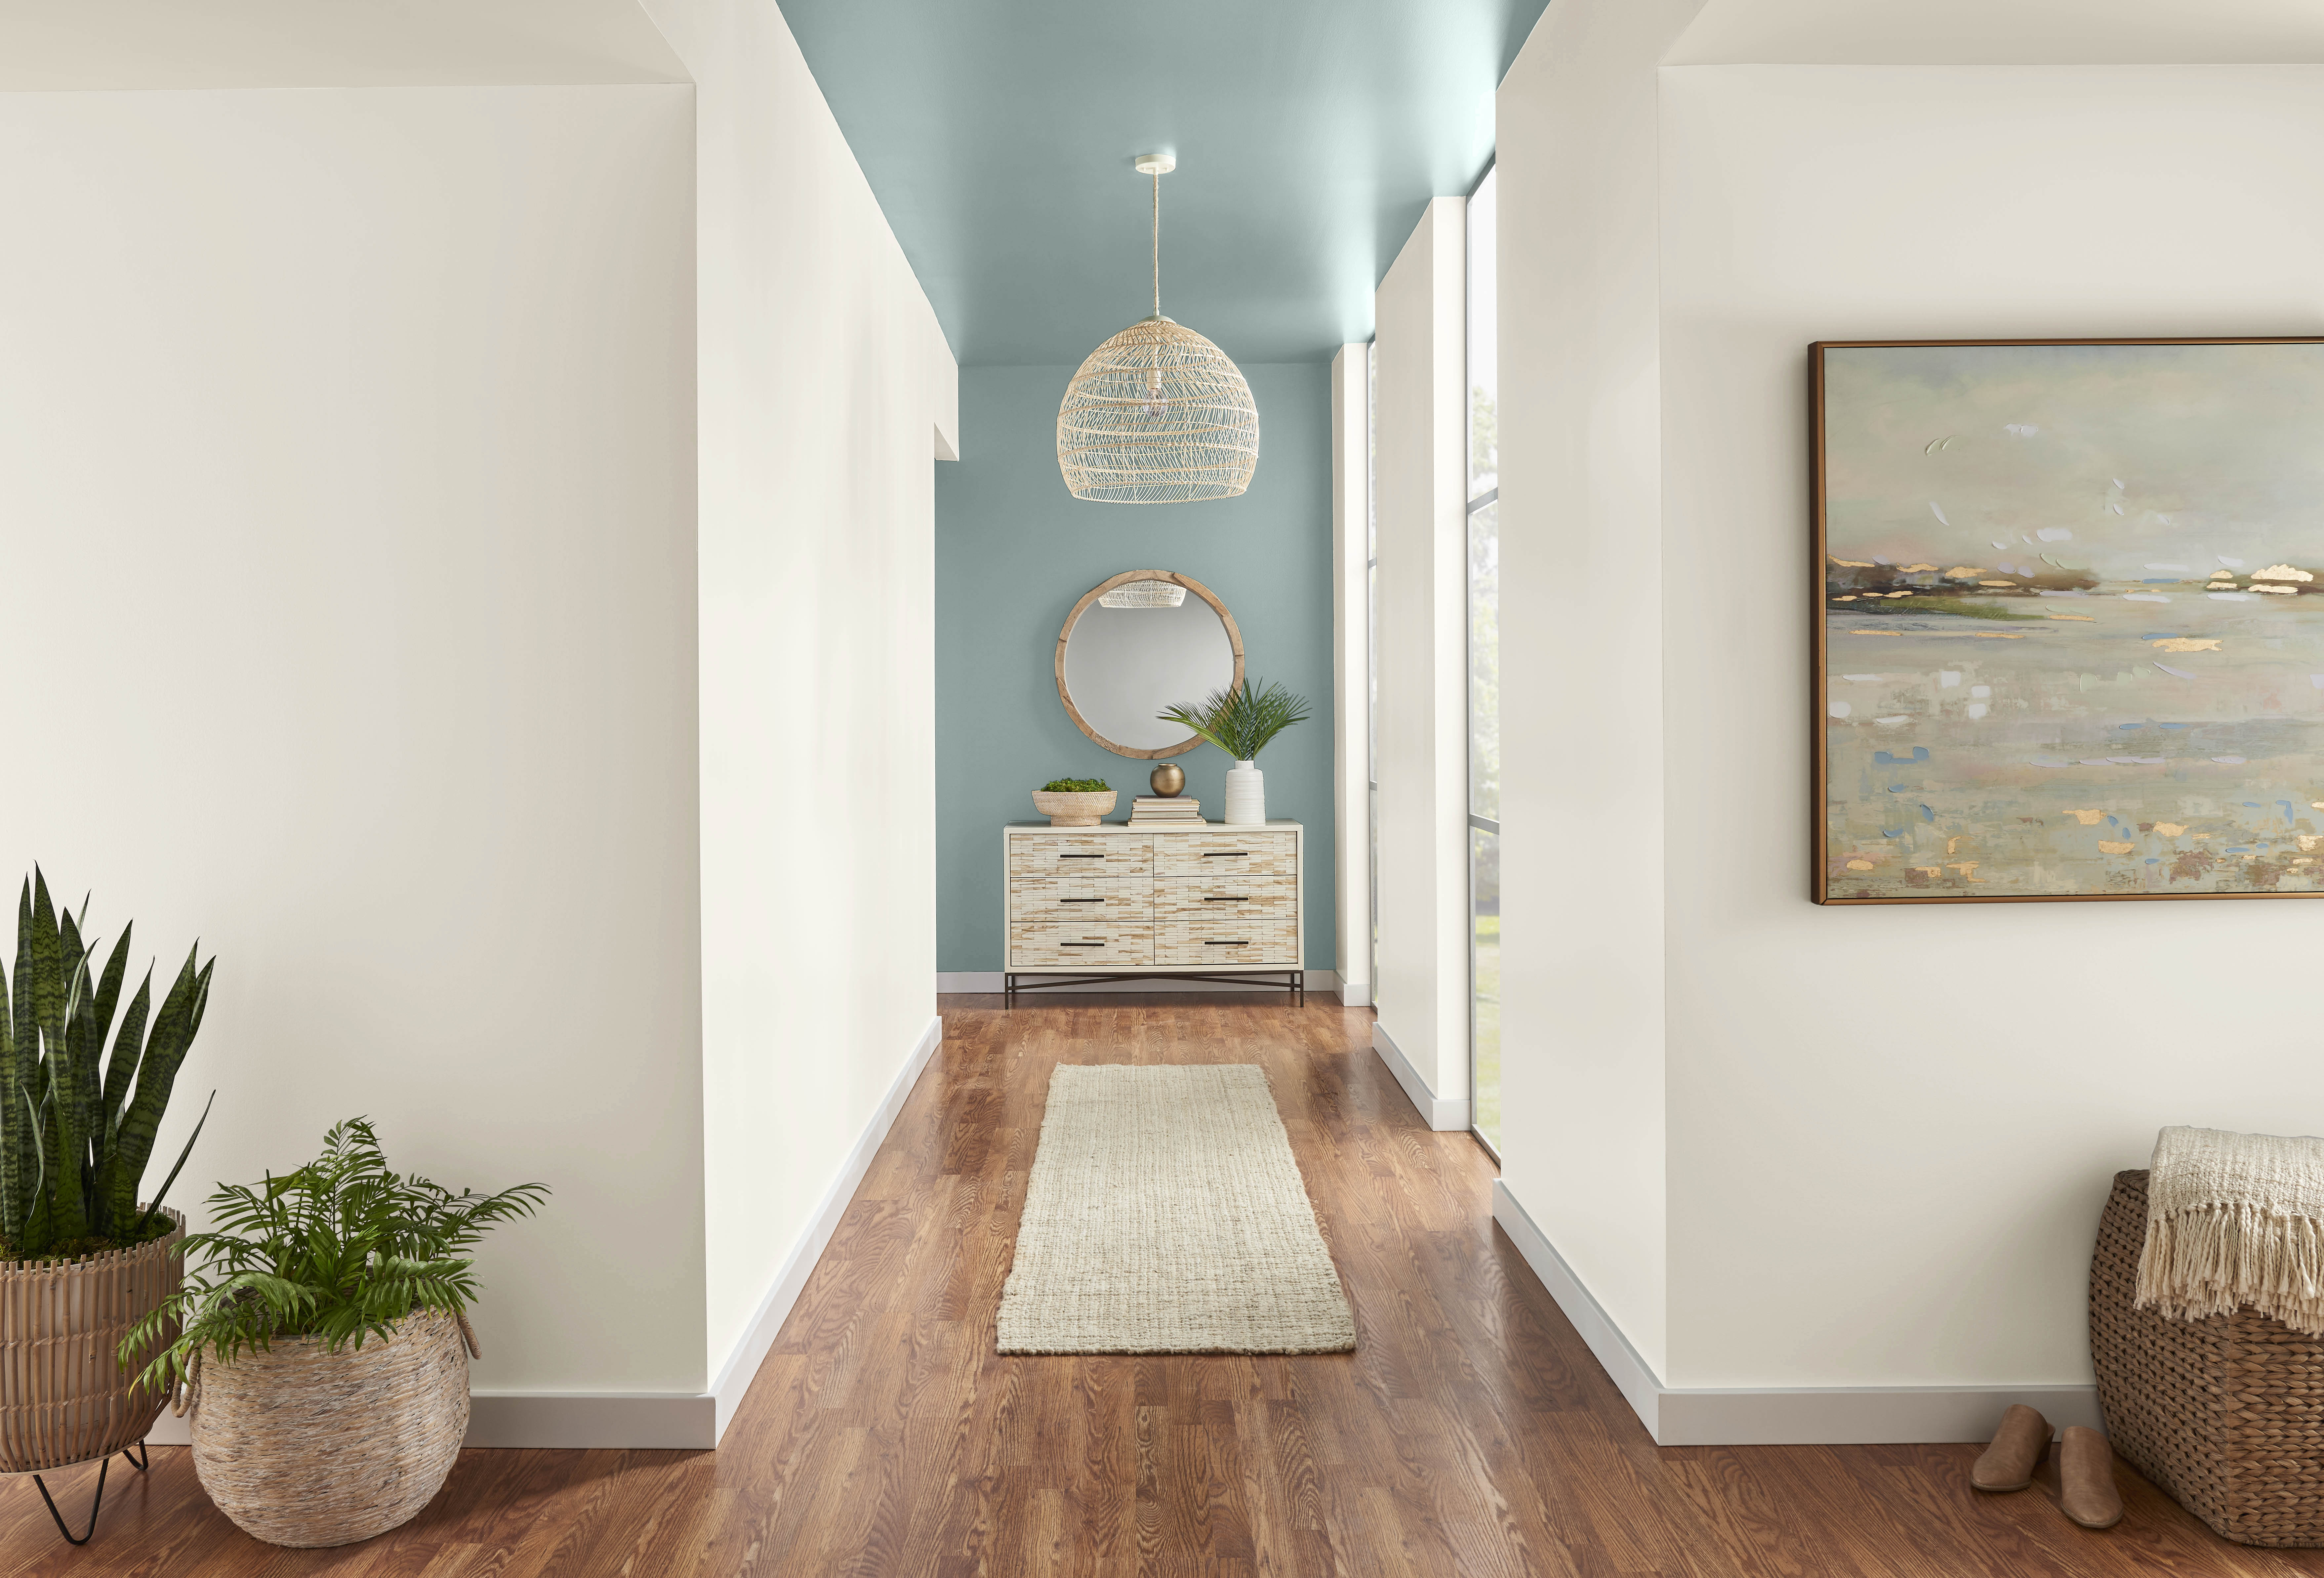 A long hallway with white walls and an accent wall and ceiling painted in a dusty blue green colour